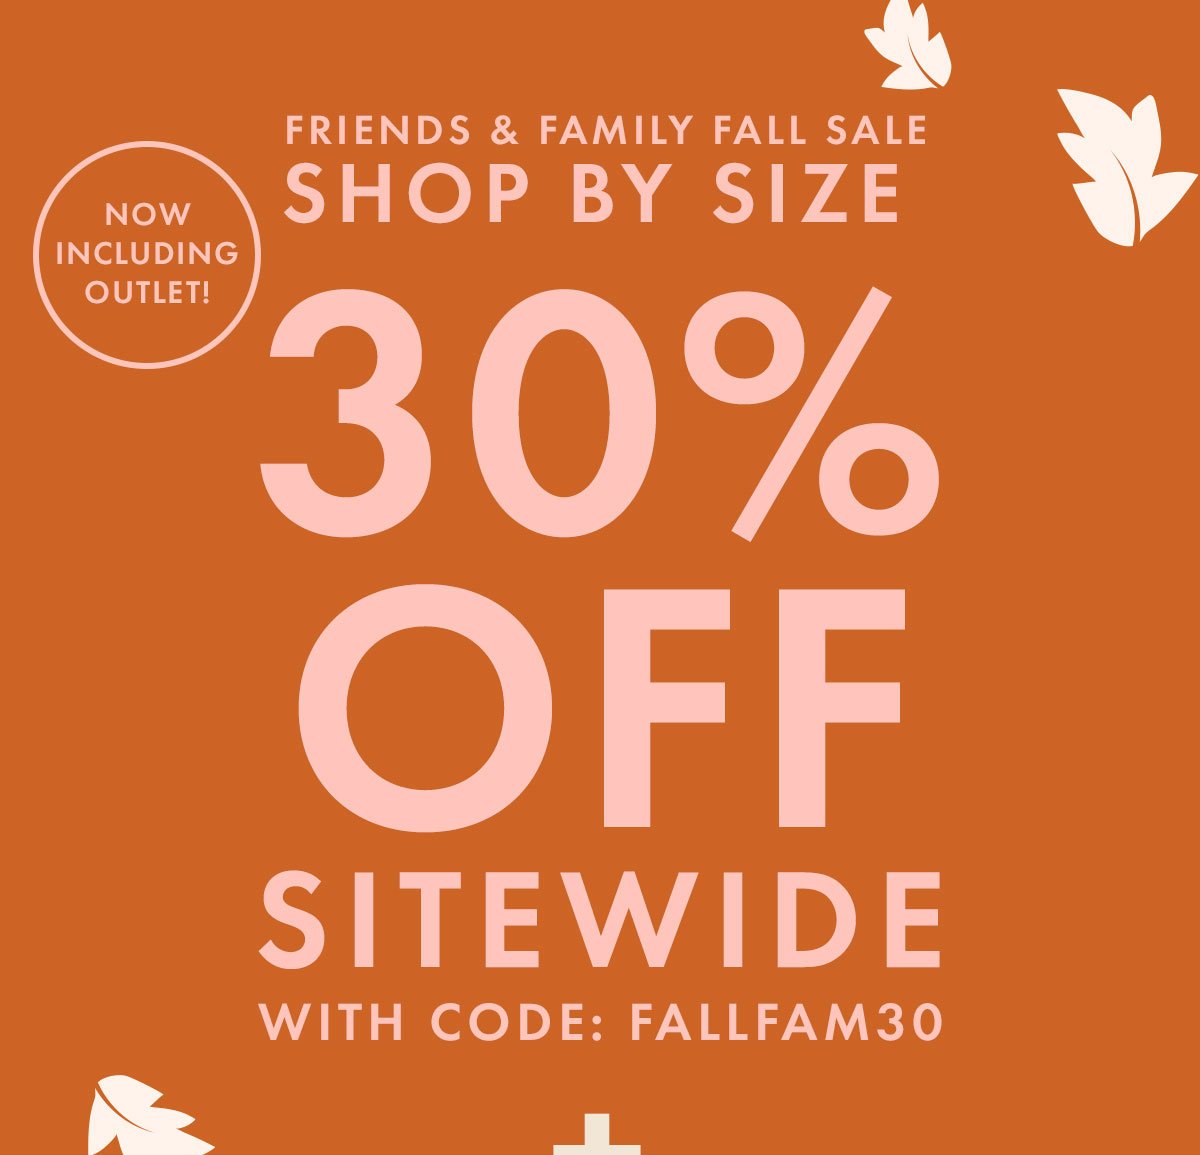 Friends & Family Fall Sale: Shop by Size | 30% Off Sitewide with Code: FALLFAM30